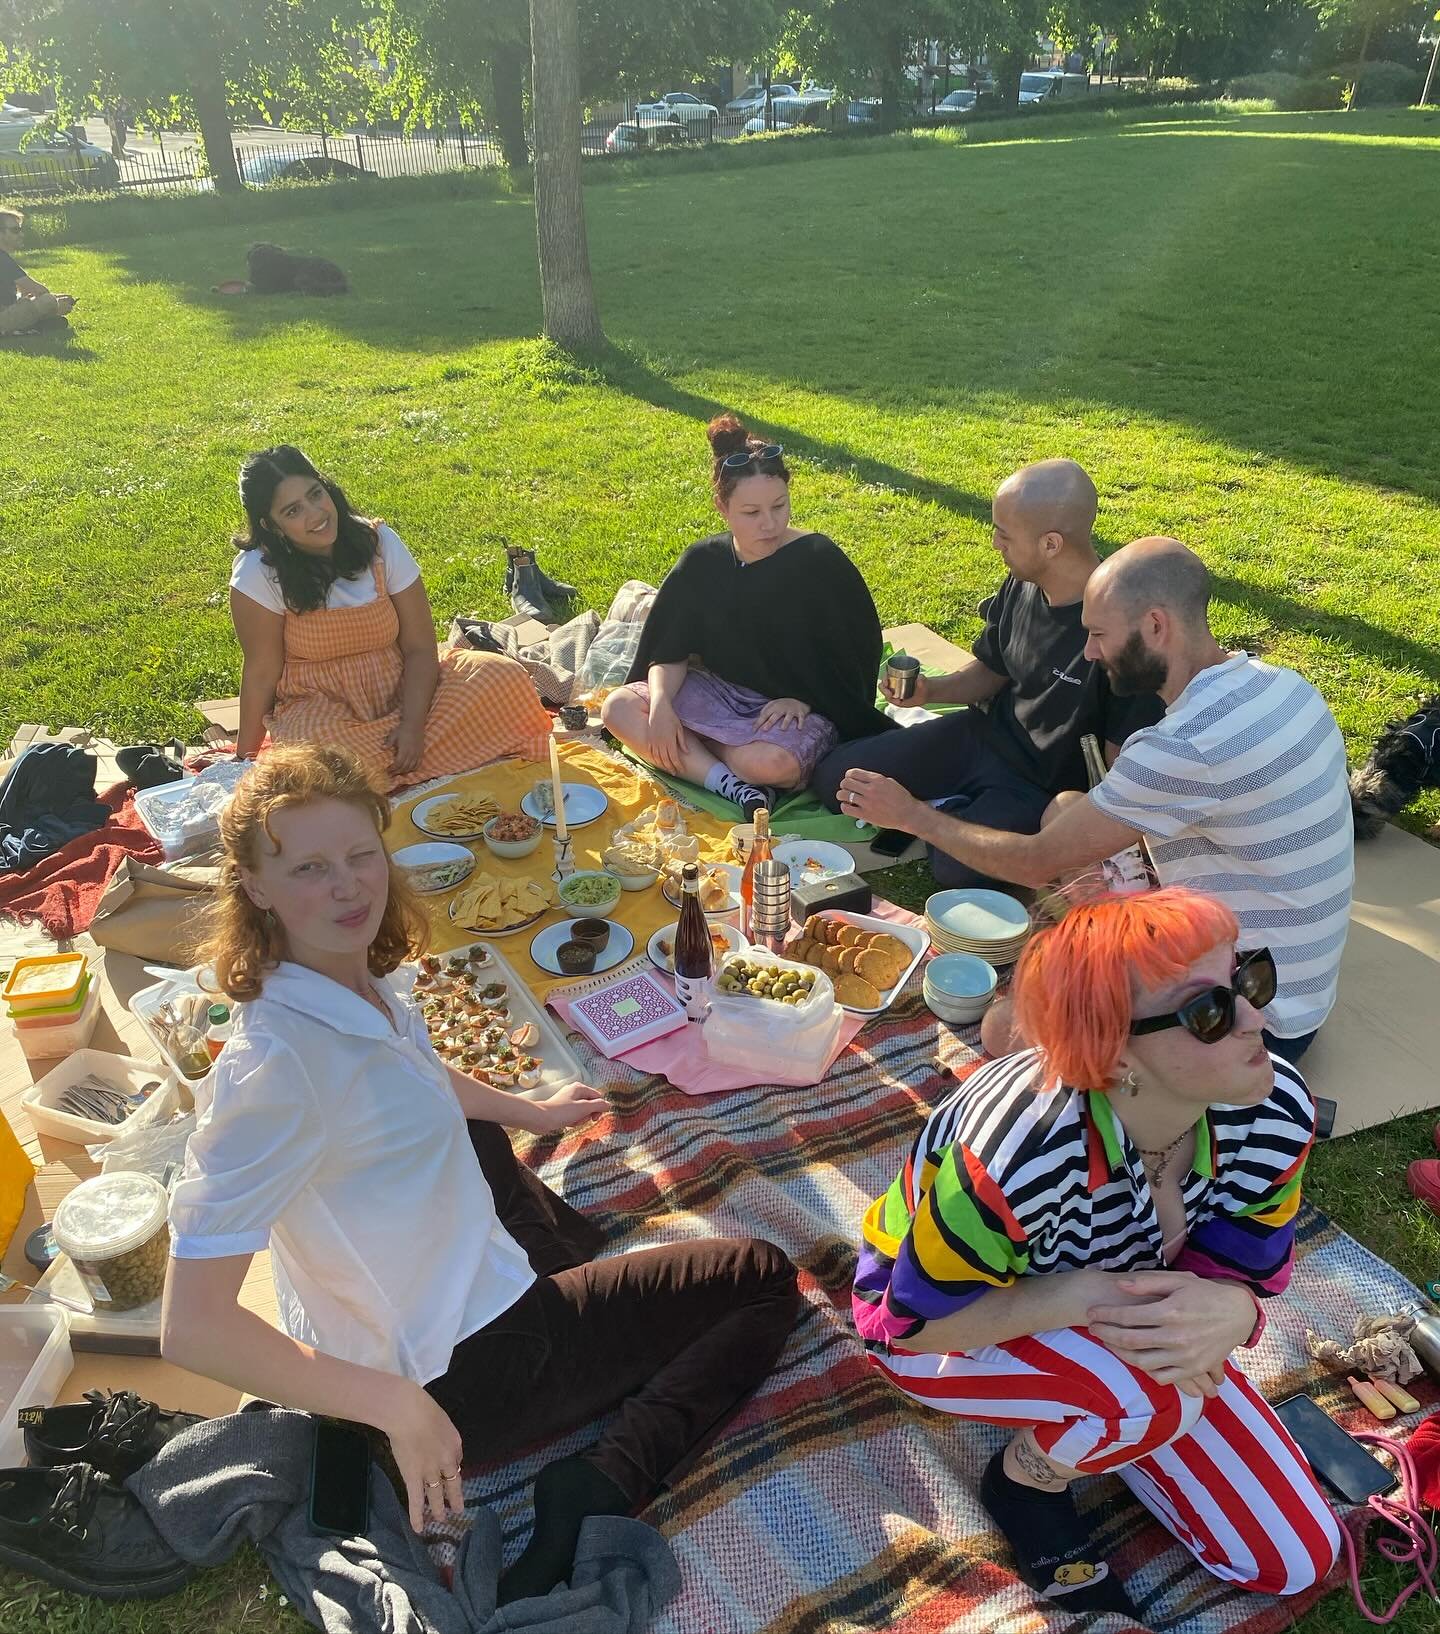 🥪BIRTHDAY PICNIC🍪

Happy birthday to half of our team! We celebrated with Rosie&rsquo;s delicious food, Yasmine&rsquo;s ceramics and Alisha&rsquo;s chocolate cake🥰